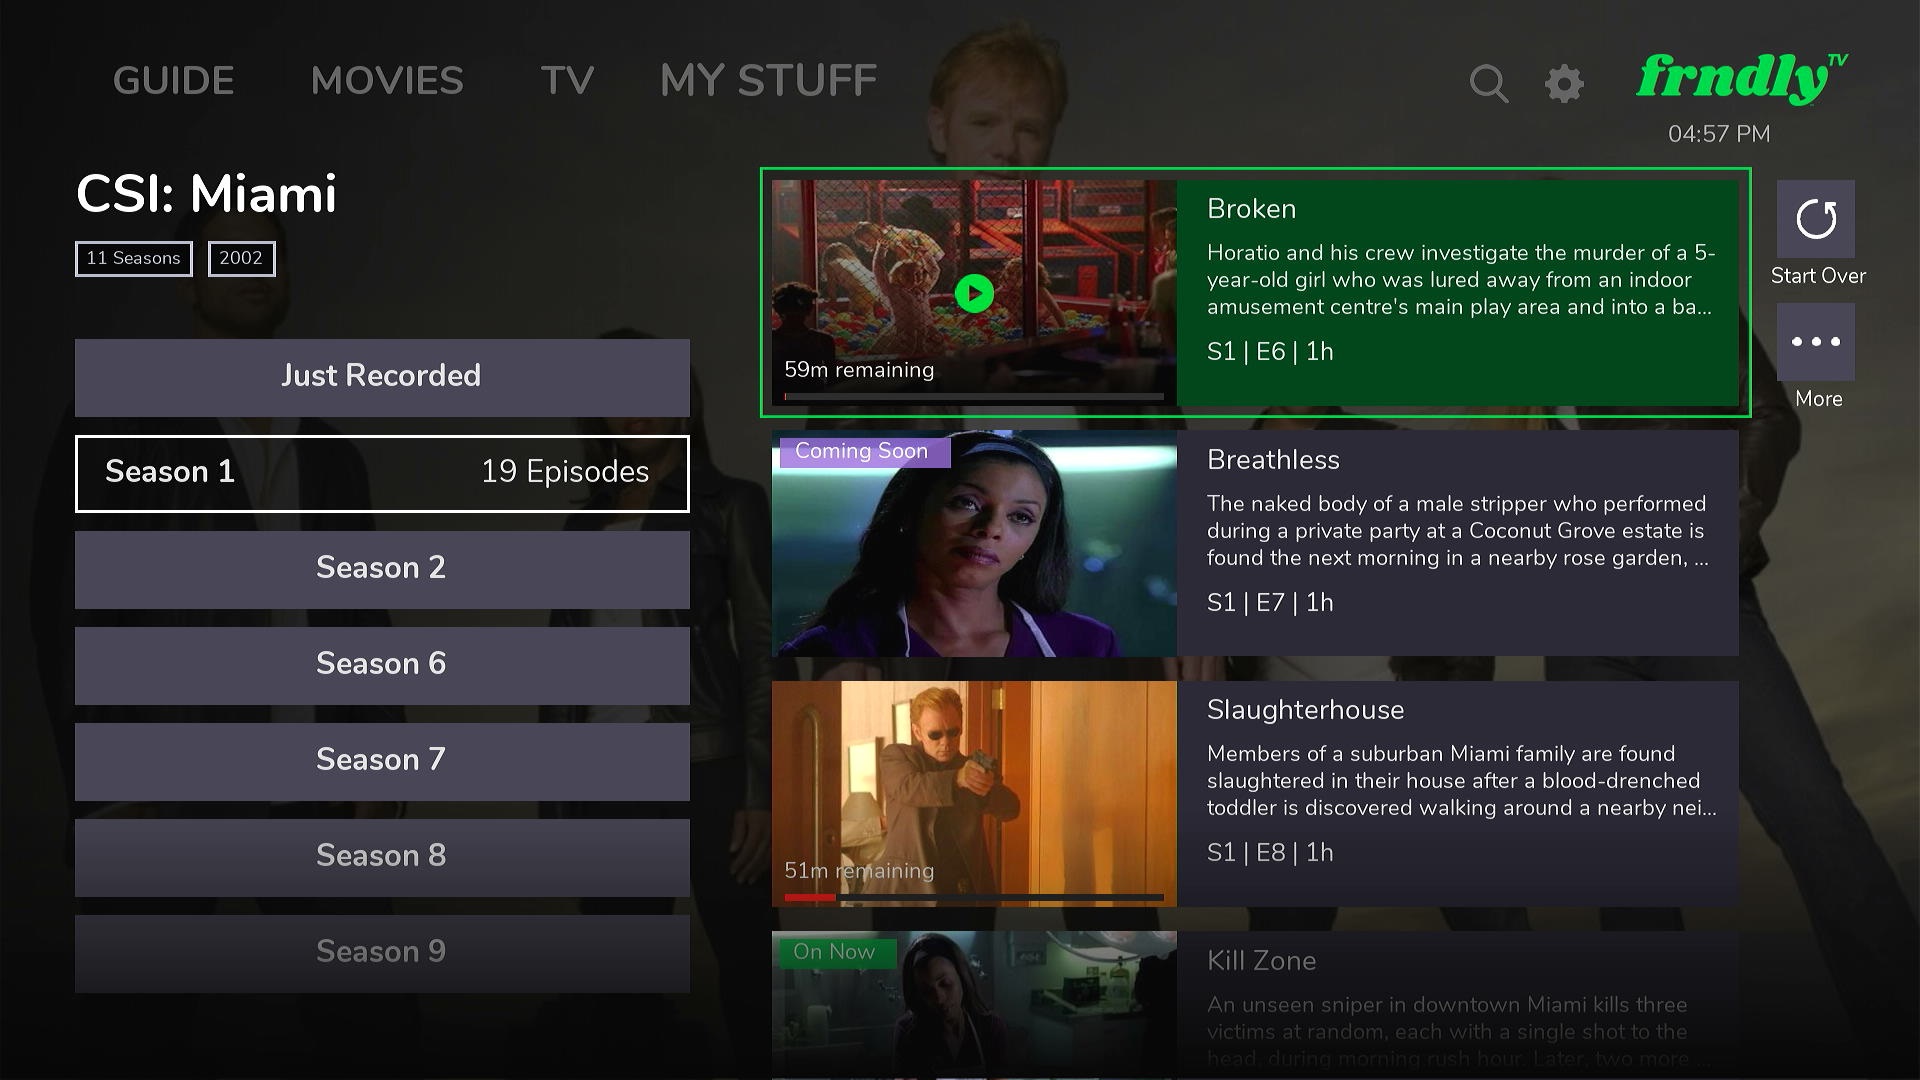 Live TV streaming services are blowing it on basic DVR features TechHive